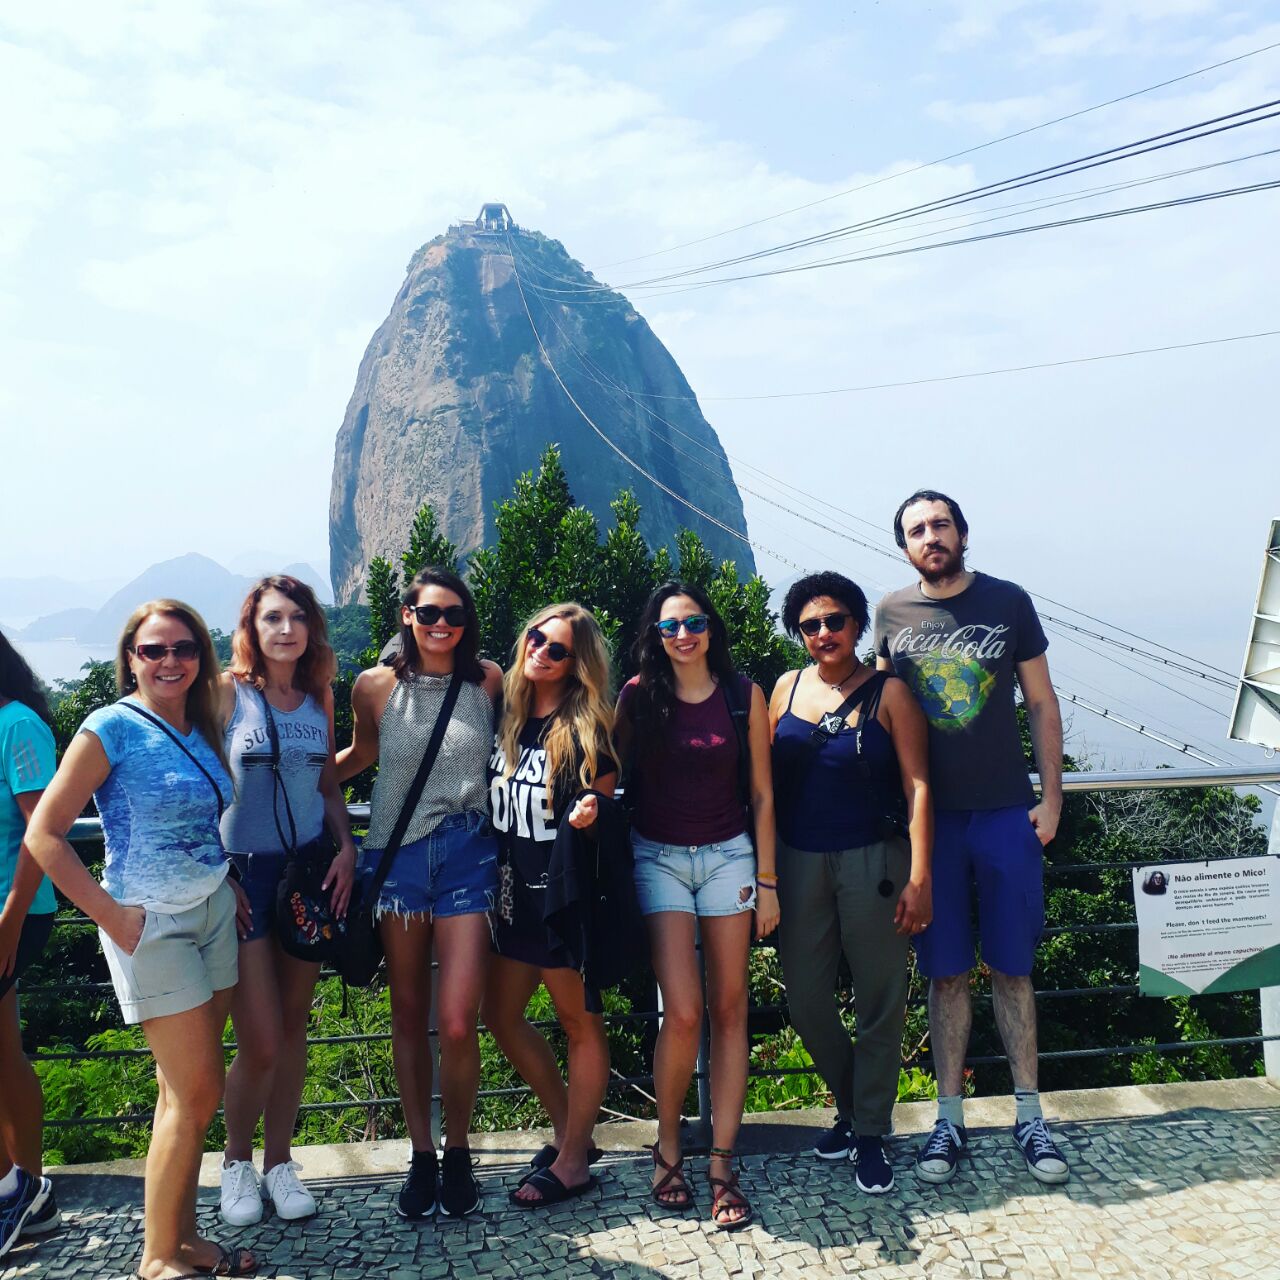 SouthAmerica.travel Team at Sugarloaf Mountain in Rio